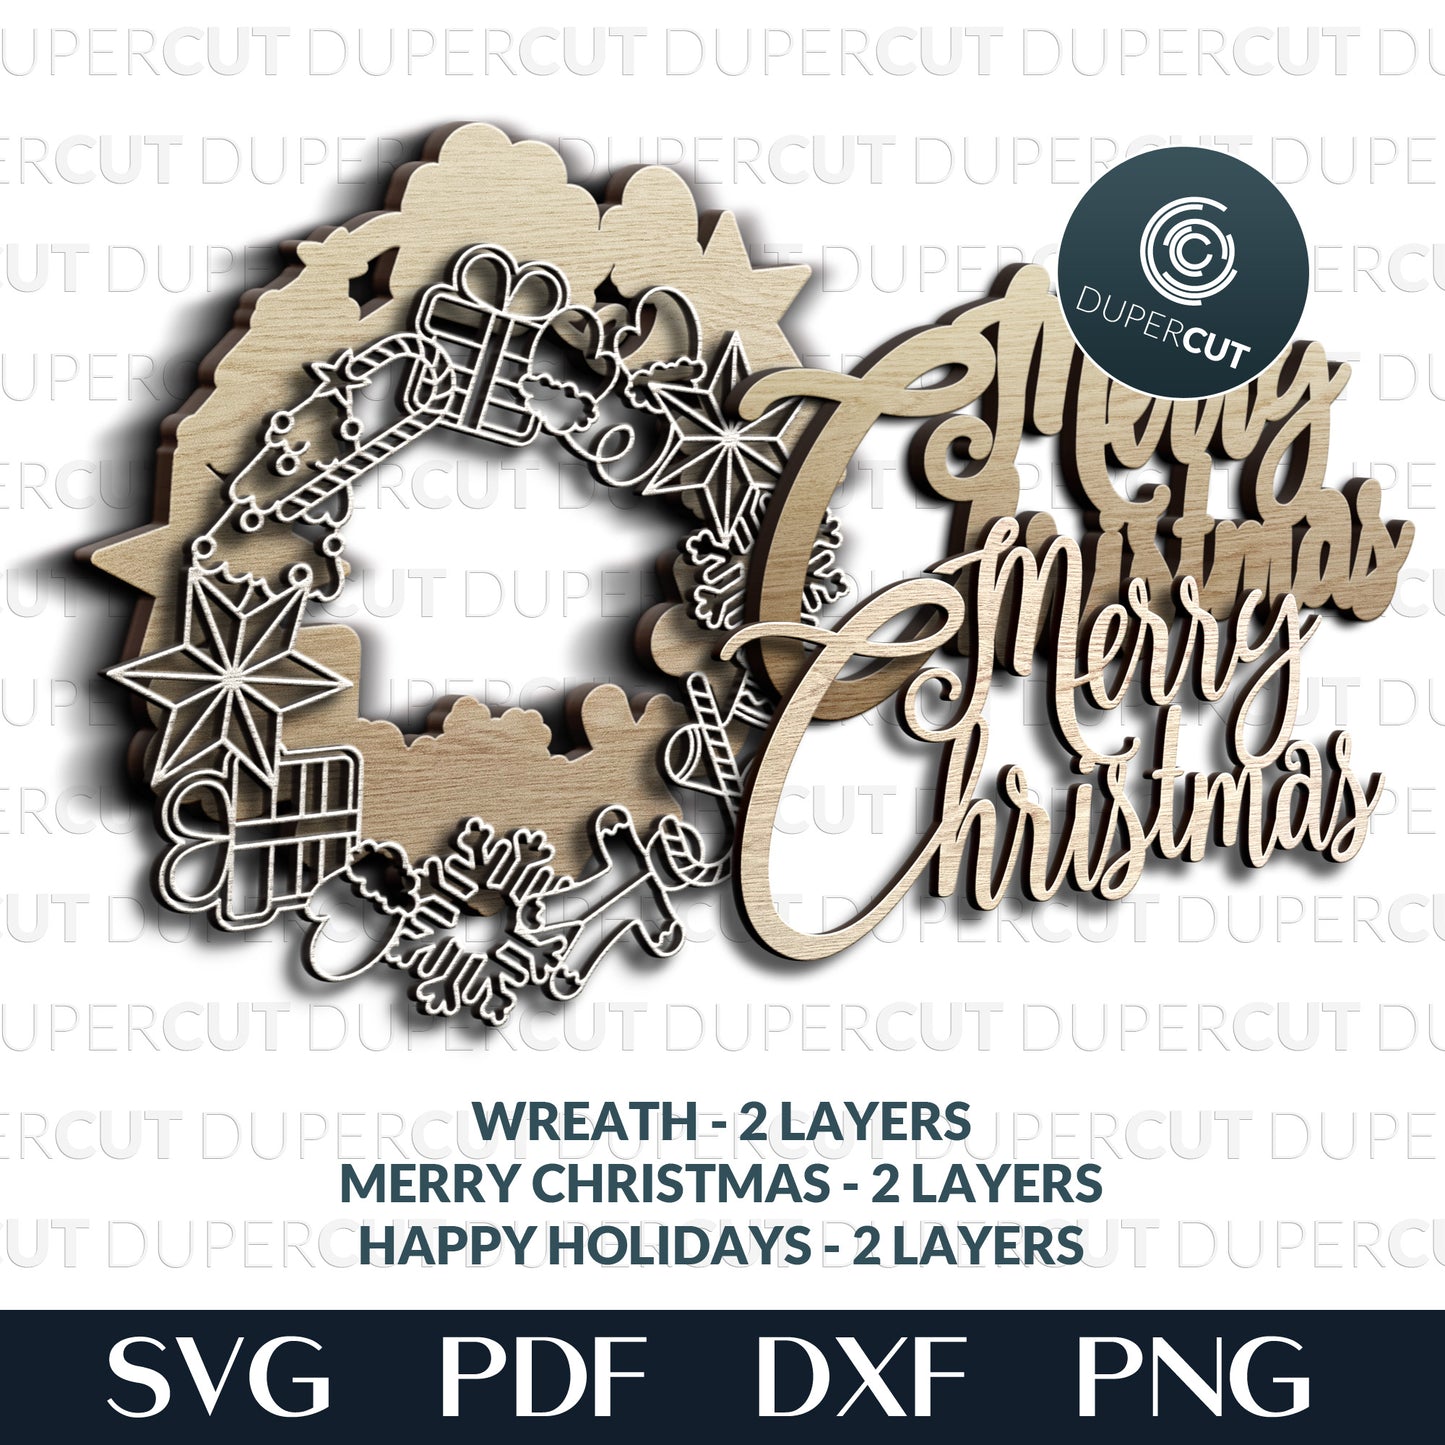 Christmas wreath door hanger - SVG PDF DXF layered files for laser and digital cutting machines - Glowforge, Cricut, Silhouette, CNC plasma by DuperCut